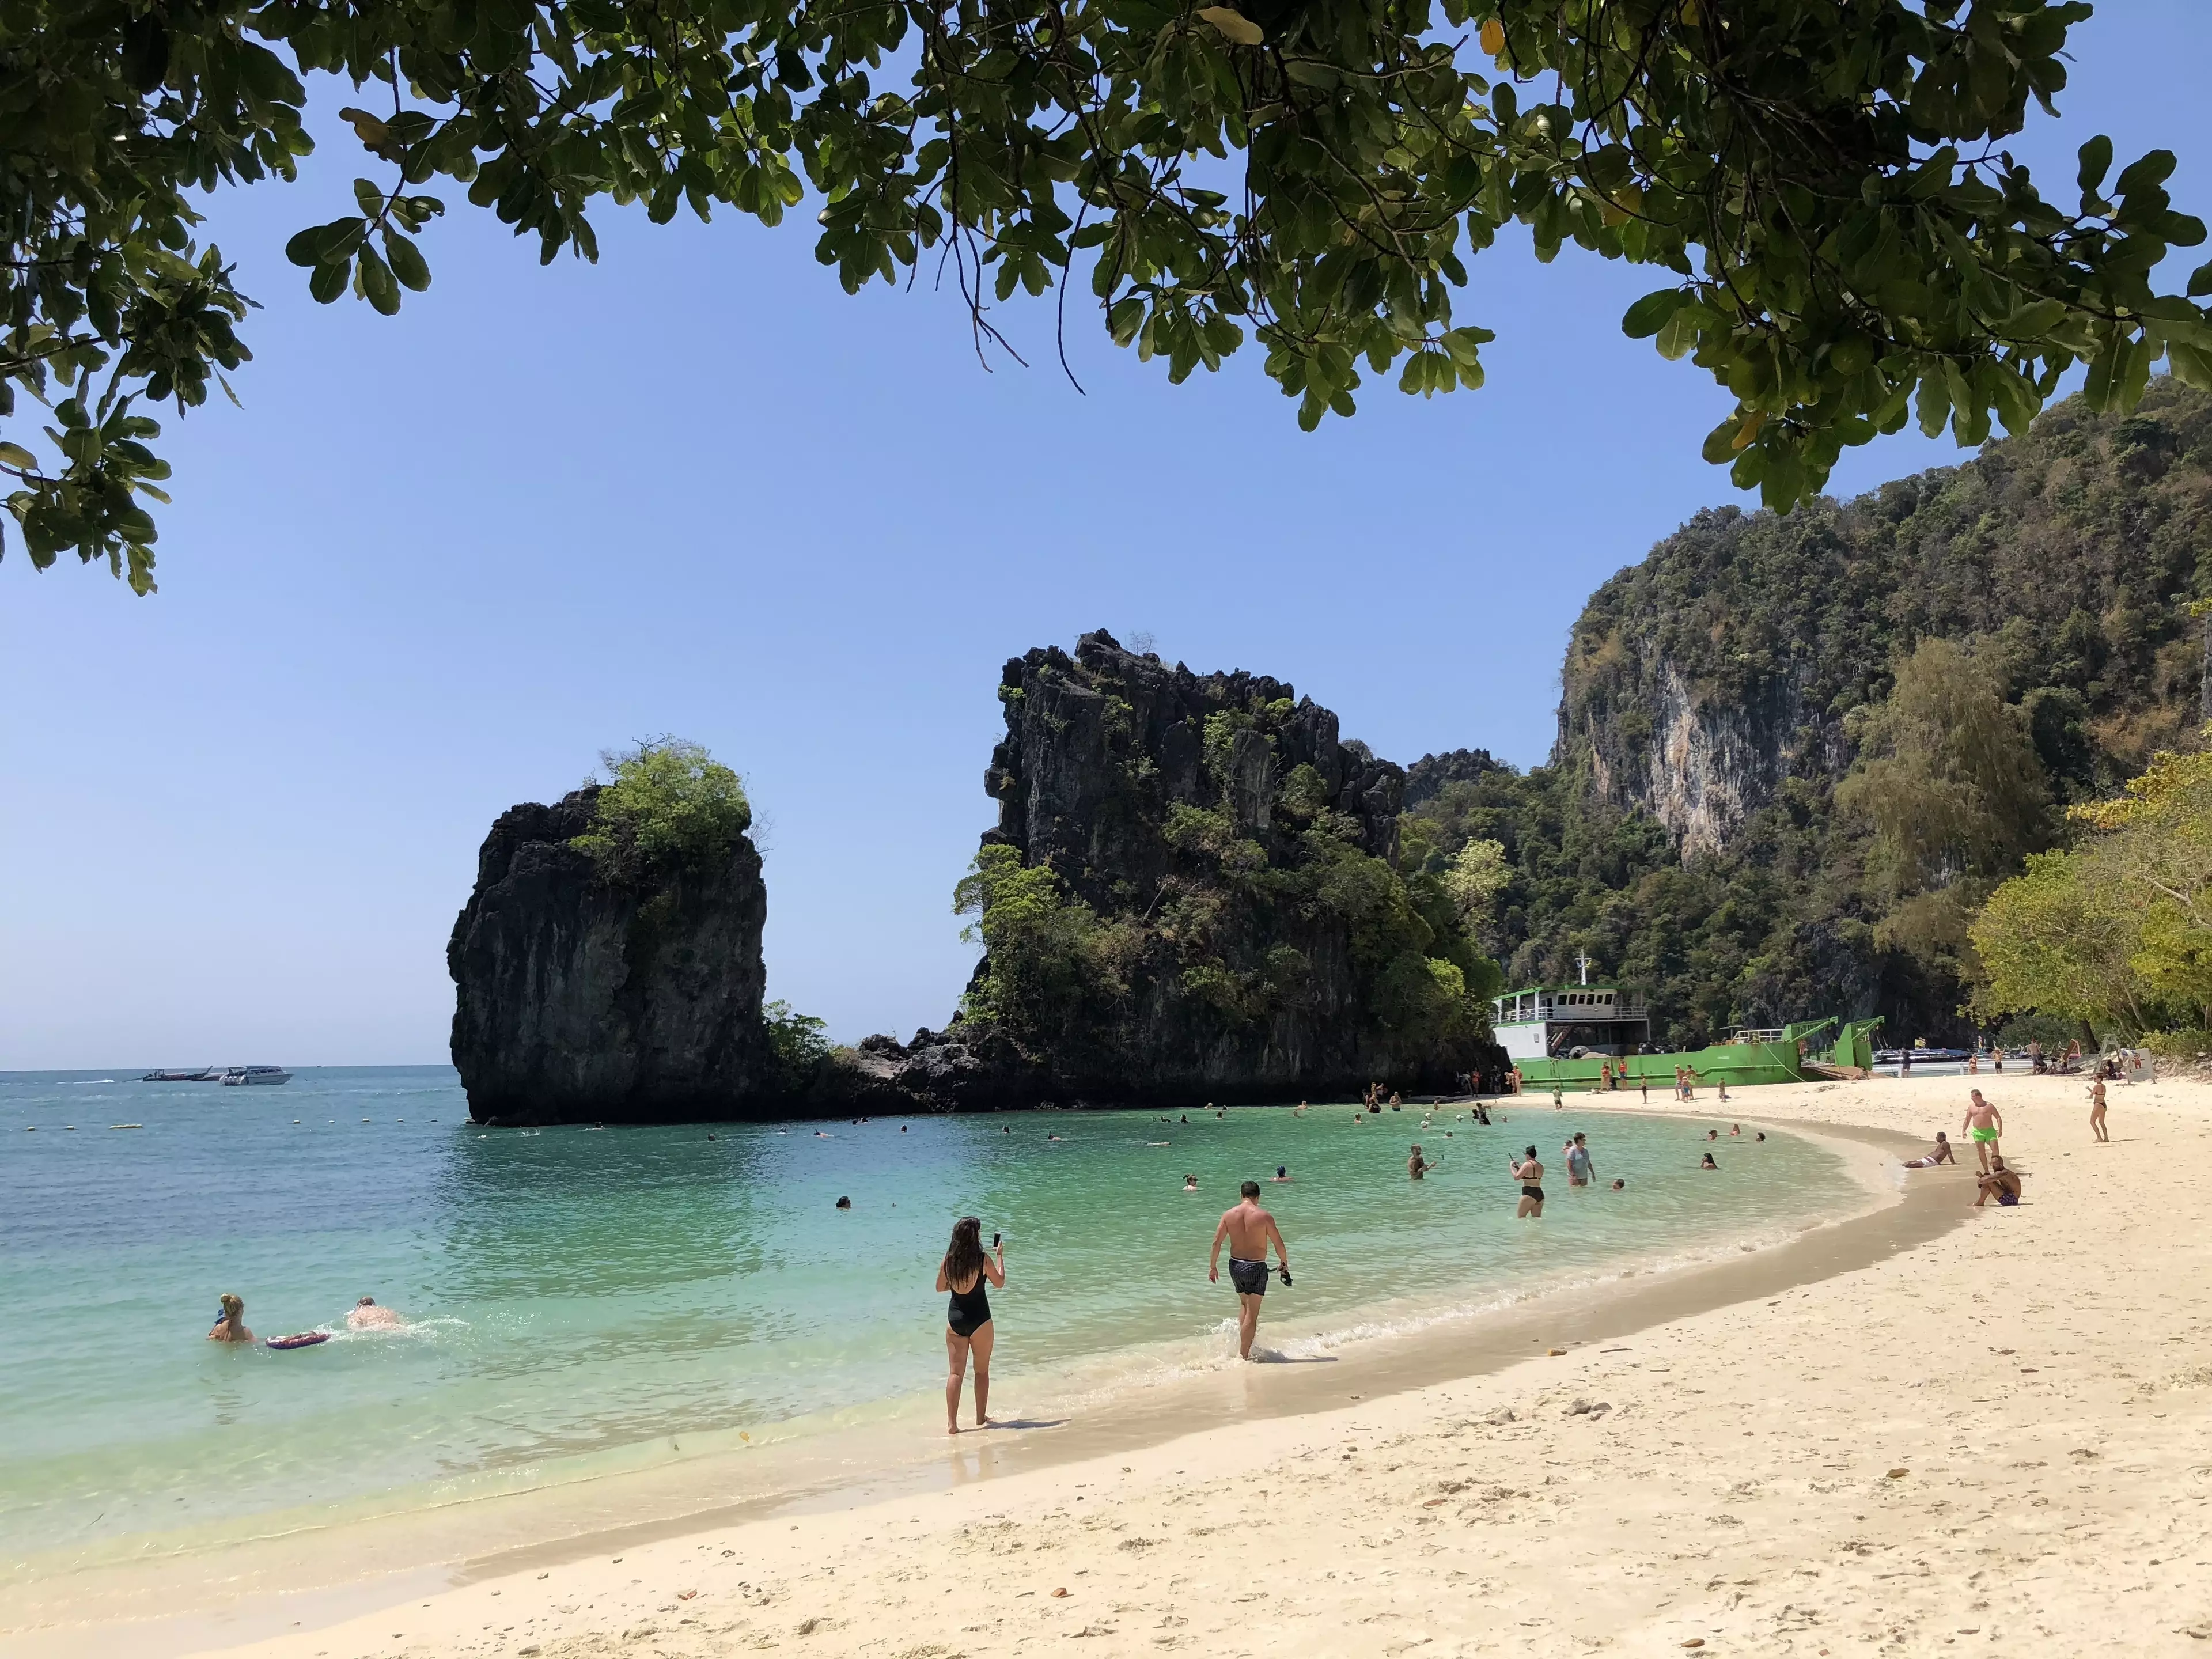 A Russian couple were found living in a cave in Krabi, Thailand, after they got stuck during lockdown.